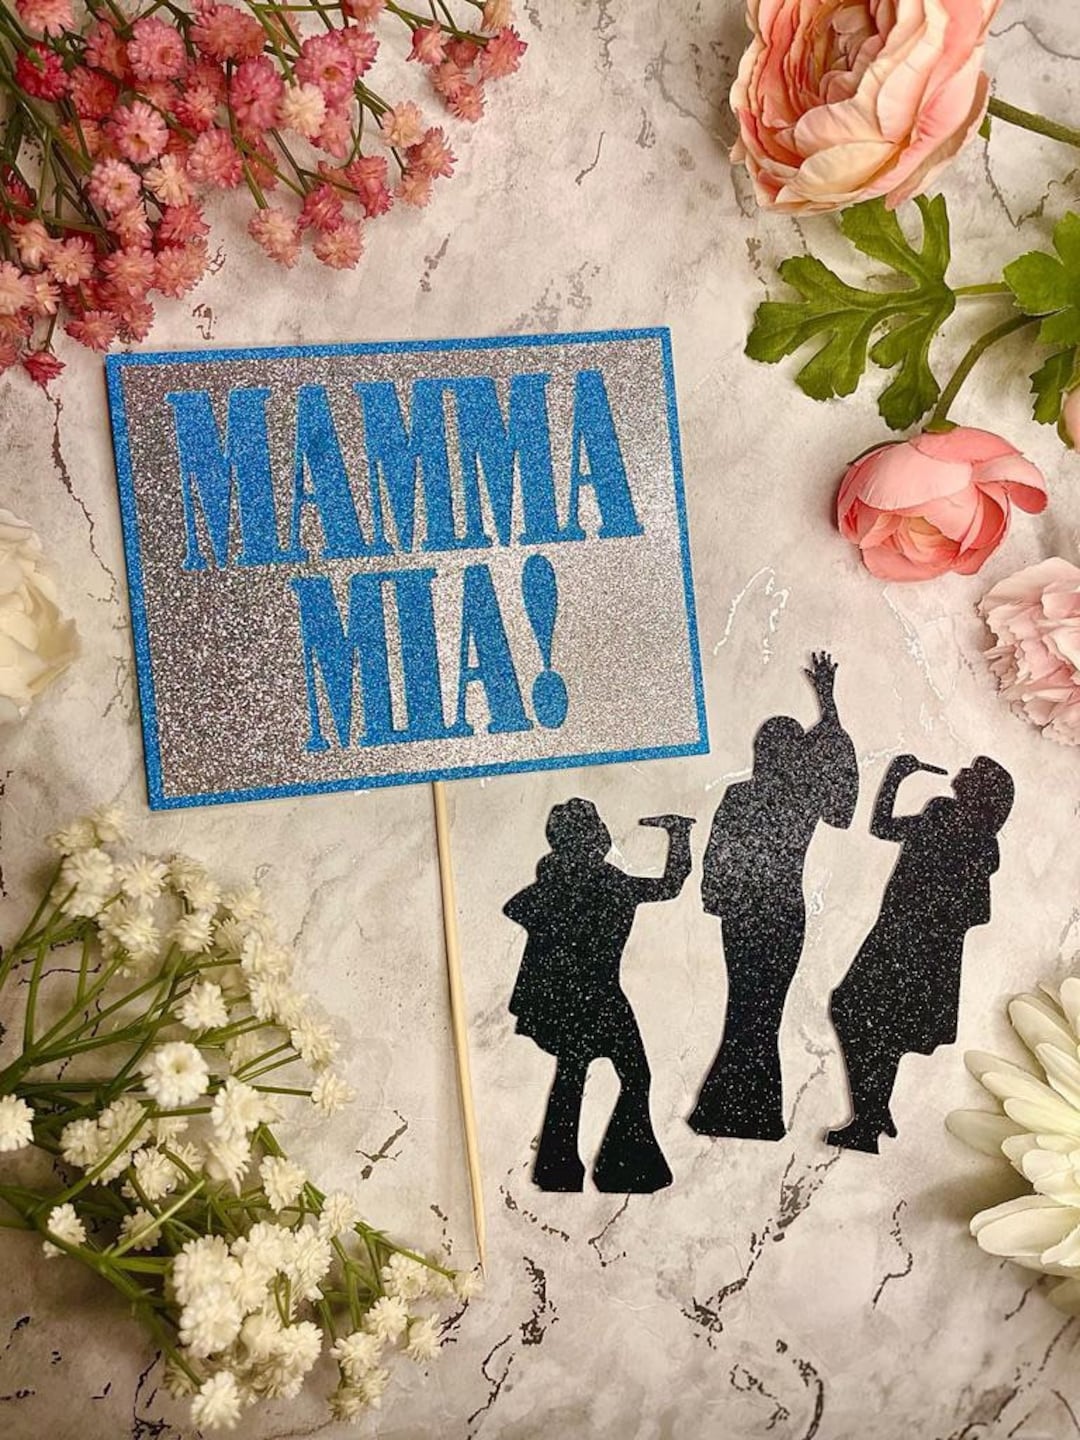 Mamma Mia Party Decorations,Birthday Party Supplies For Mamma Mia Includes  Banner - Cake Topper - 12 Cupcake Toppers - 18 Balloons for Girl Women